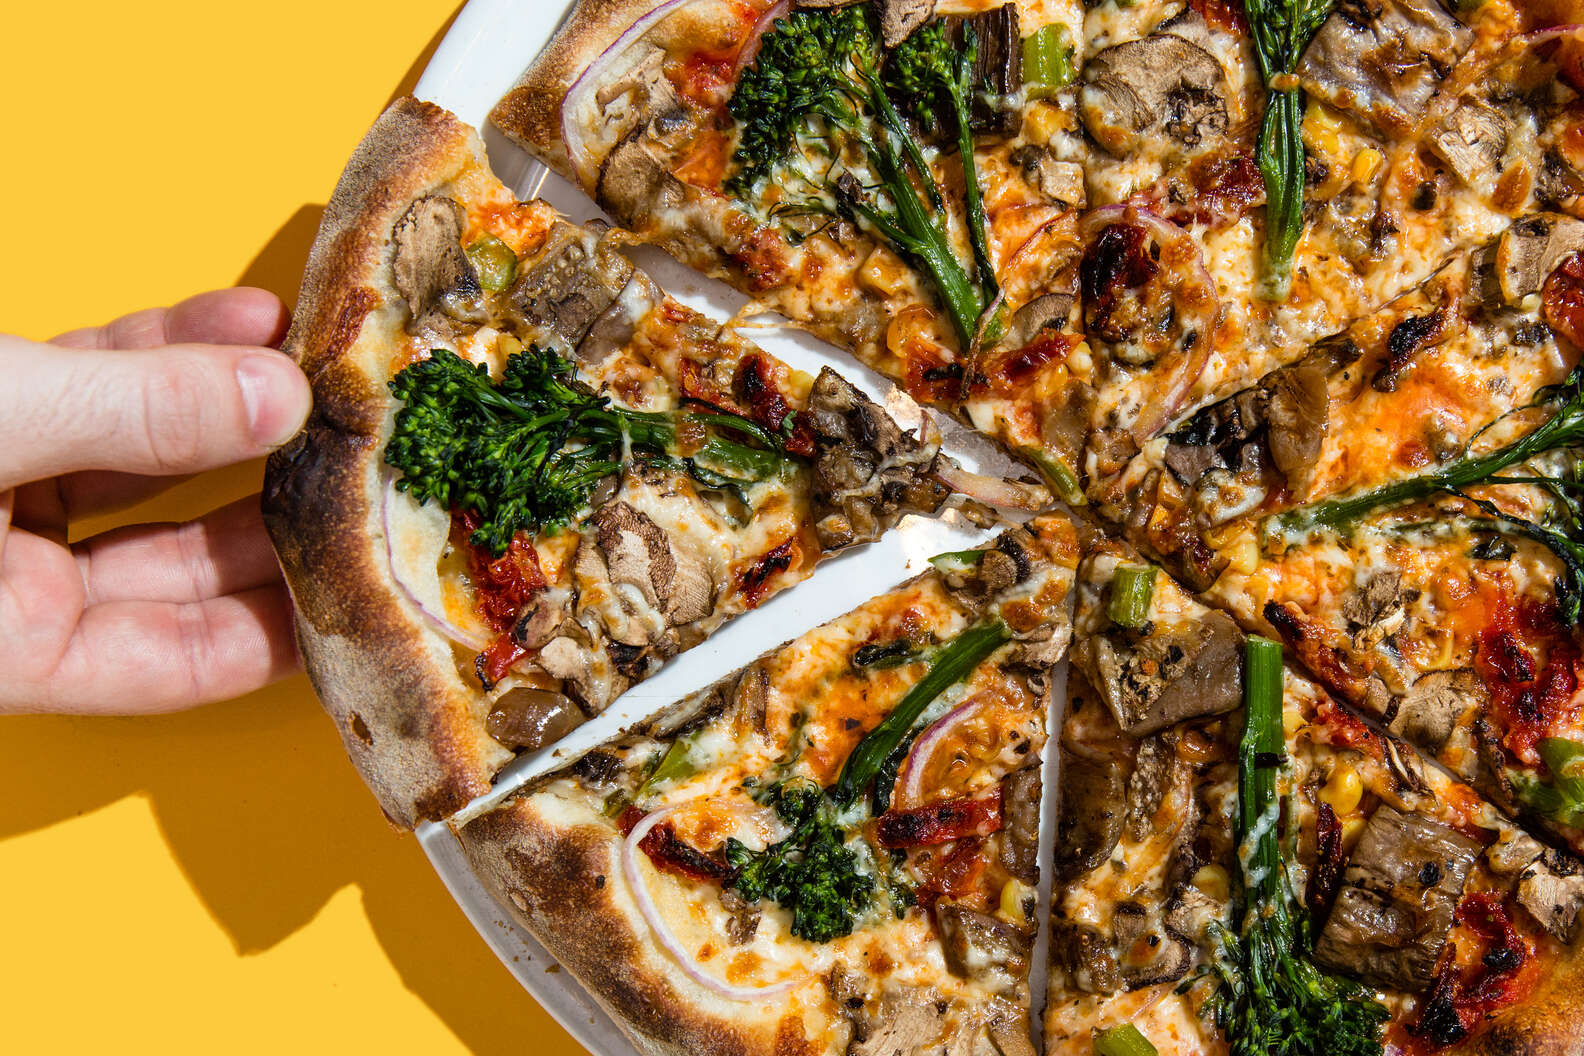 Best California Pizza Kitchen Pizzas Every CPK Pizza Pie, Ranked